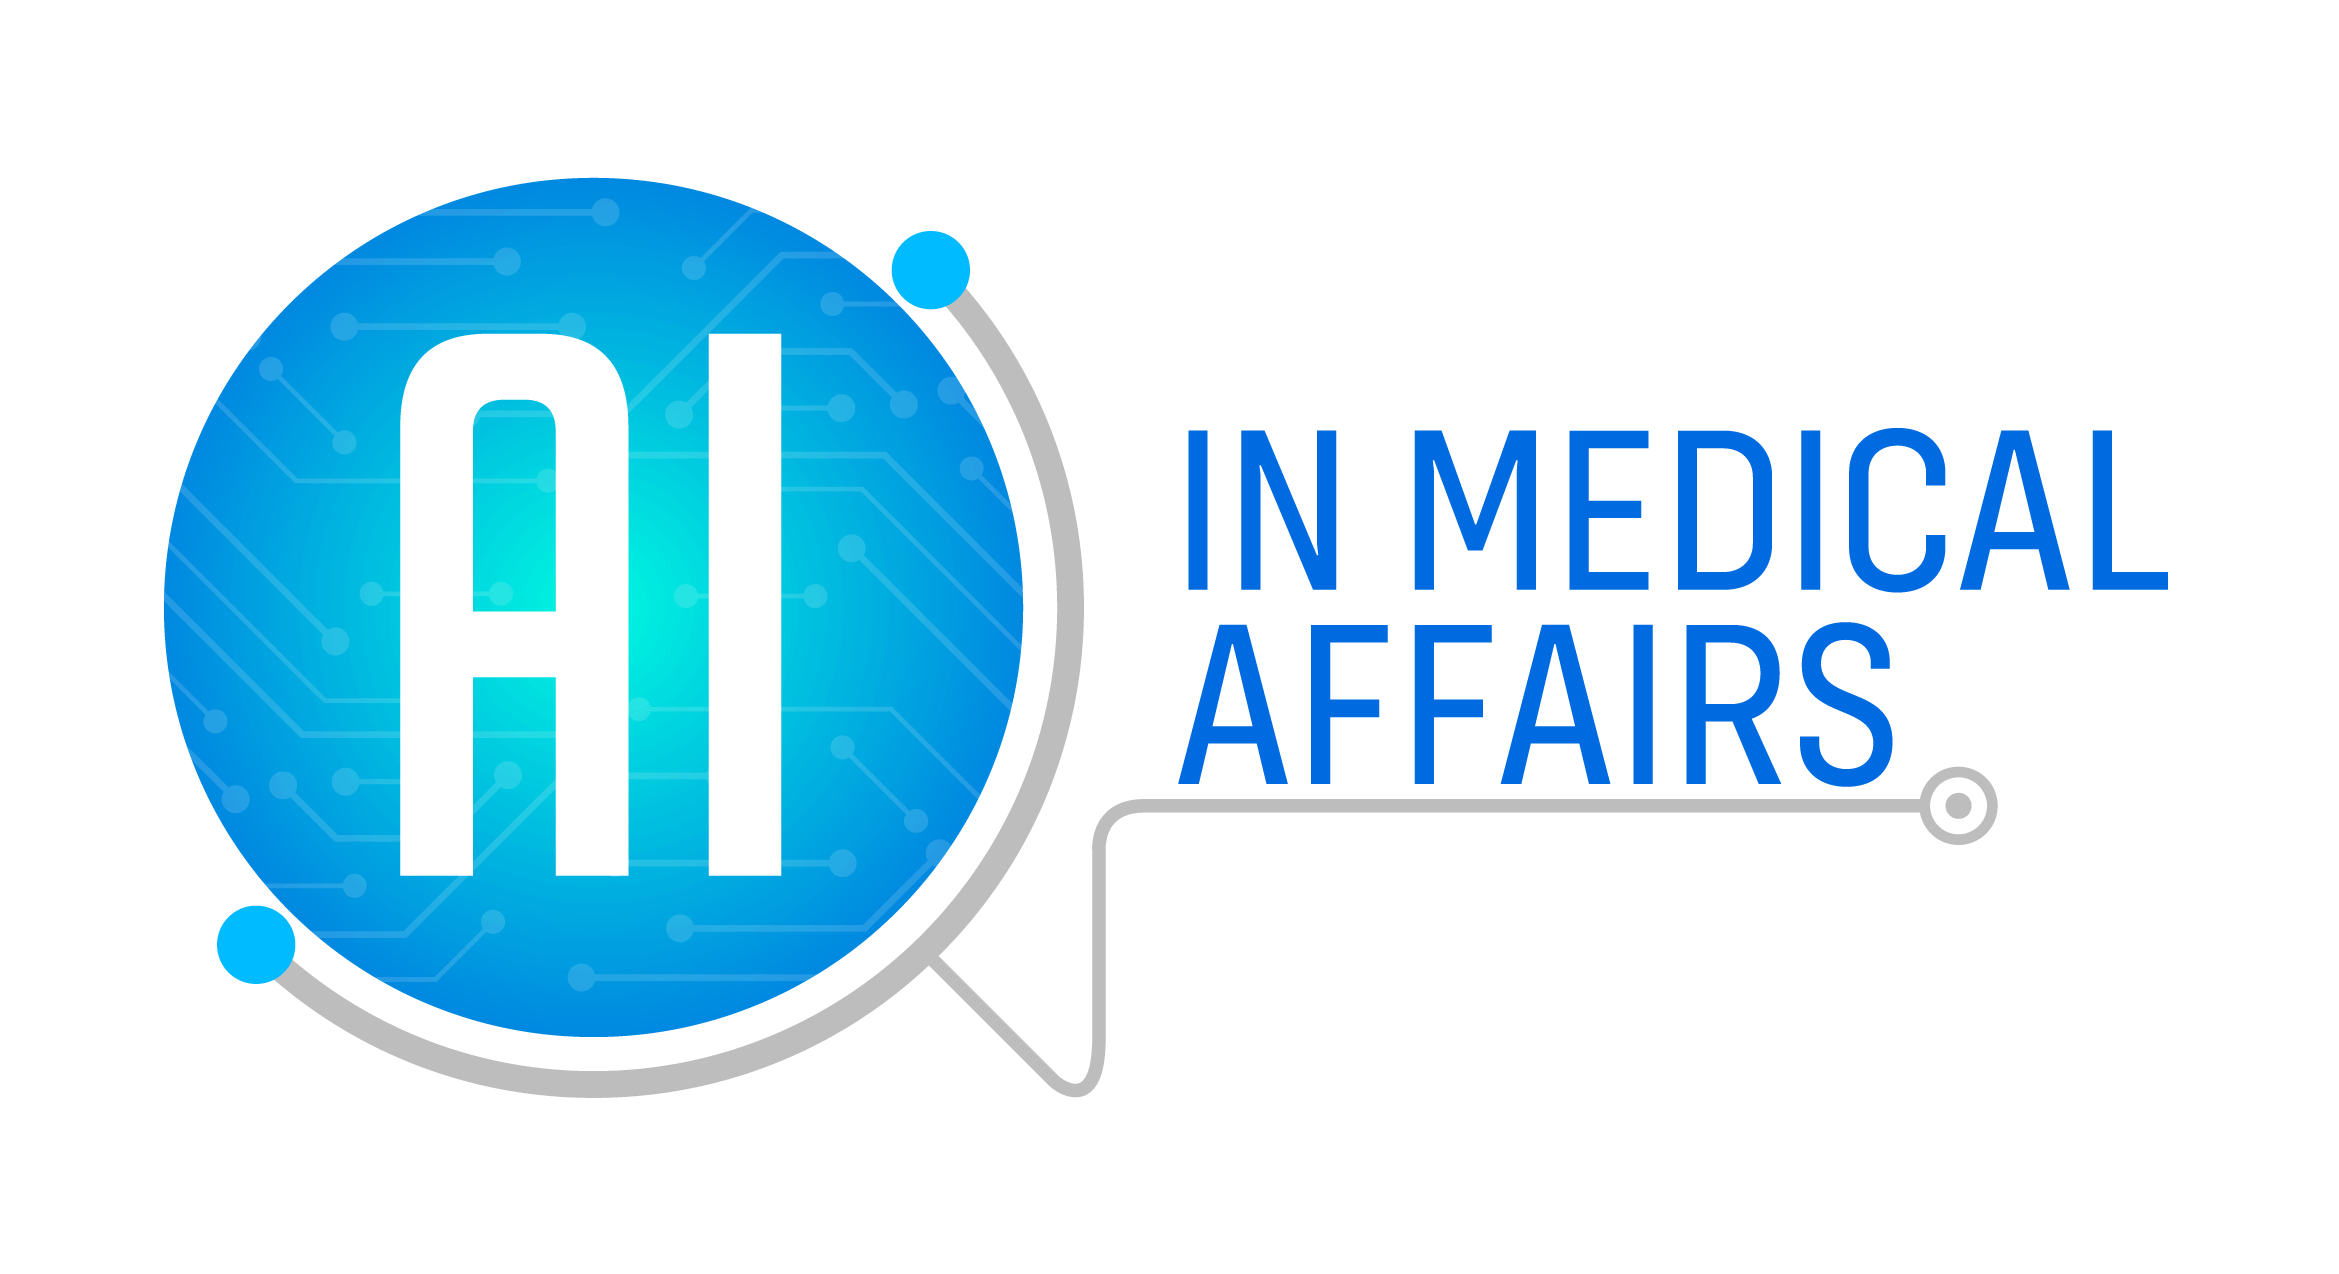 AI in Medical Affairs Integrate AI and Machine Learning to Leverage